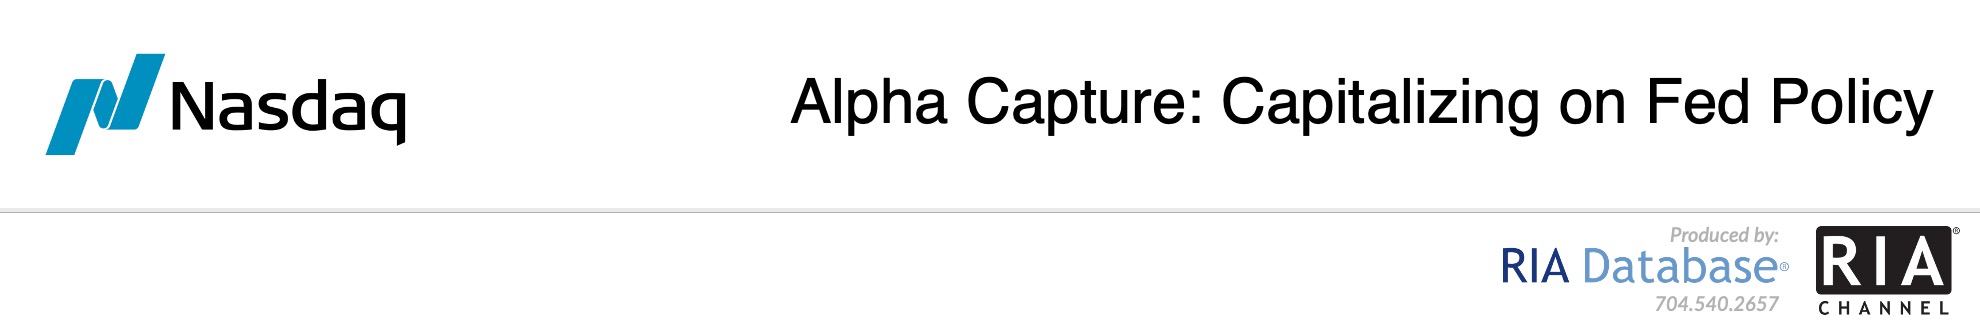 Alpha Capture: Capitalizing on Fed policy